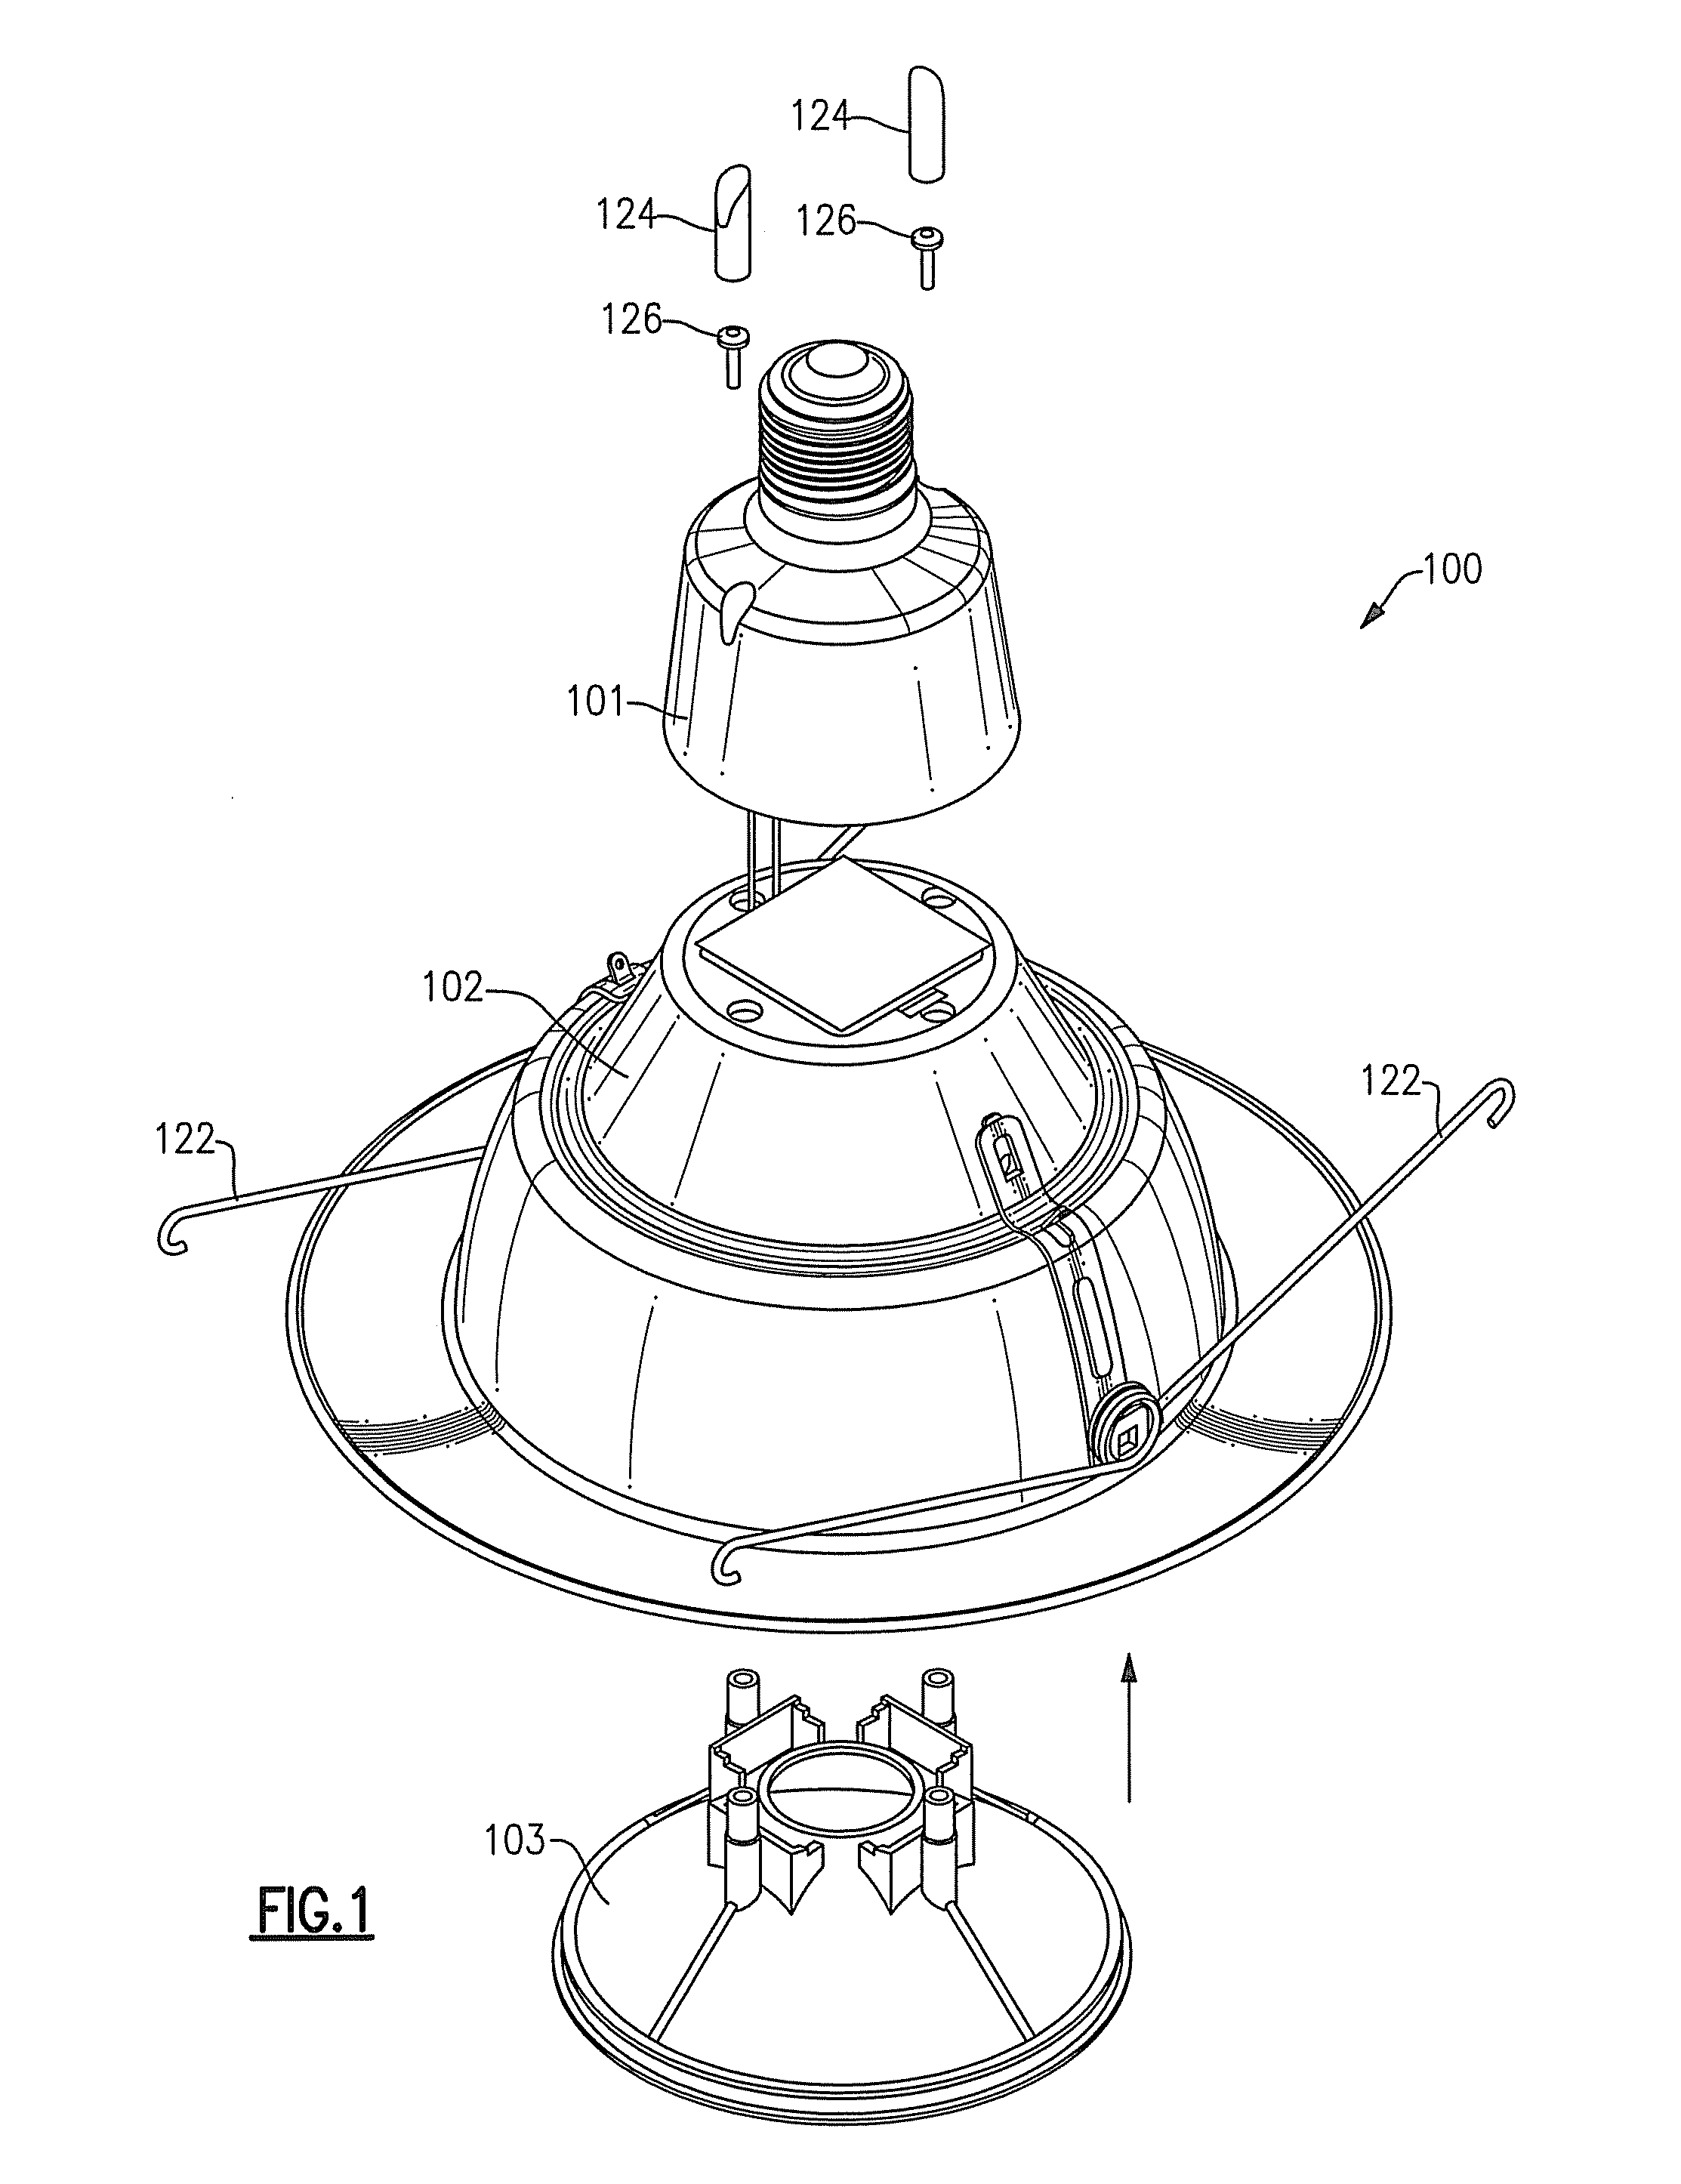 Lighting devices comprising solid state light emitters